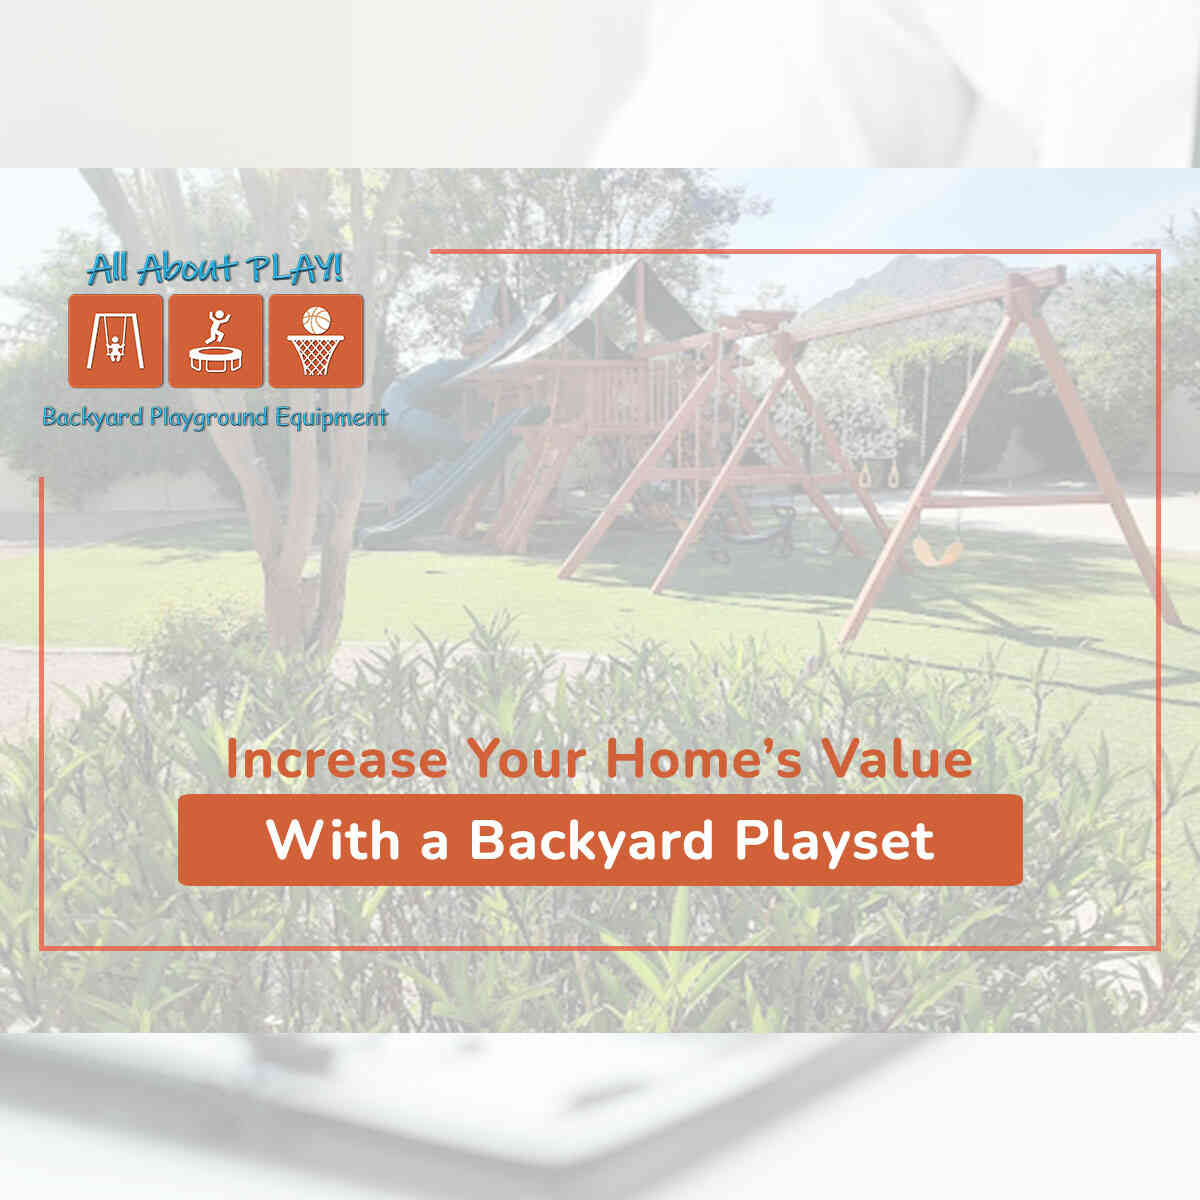 Increase Your Home's Value With a Backyard Playset